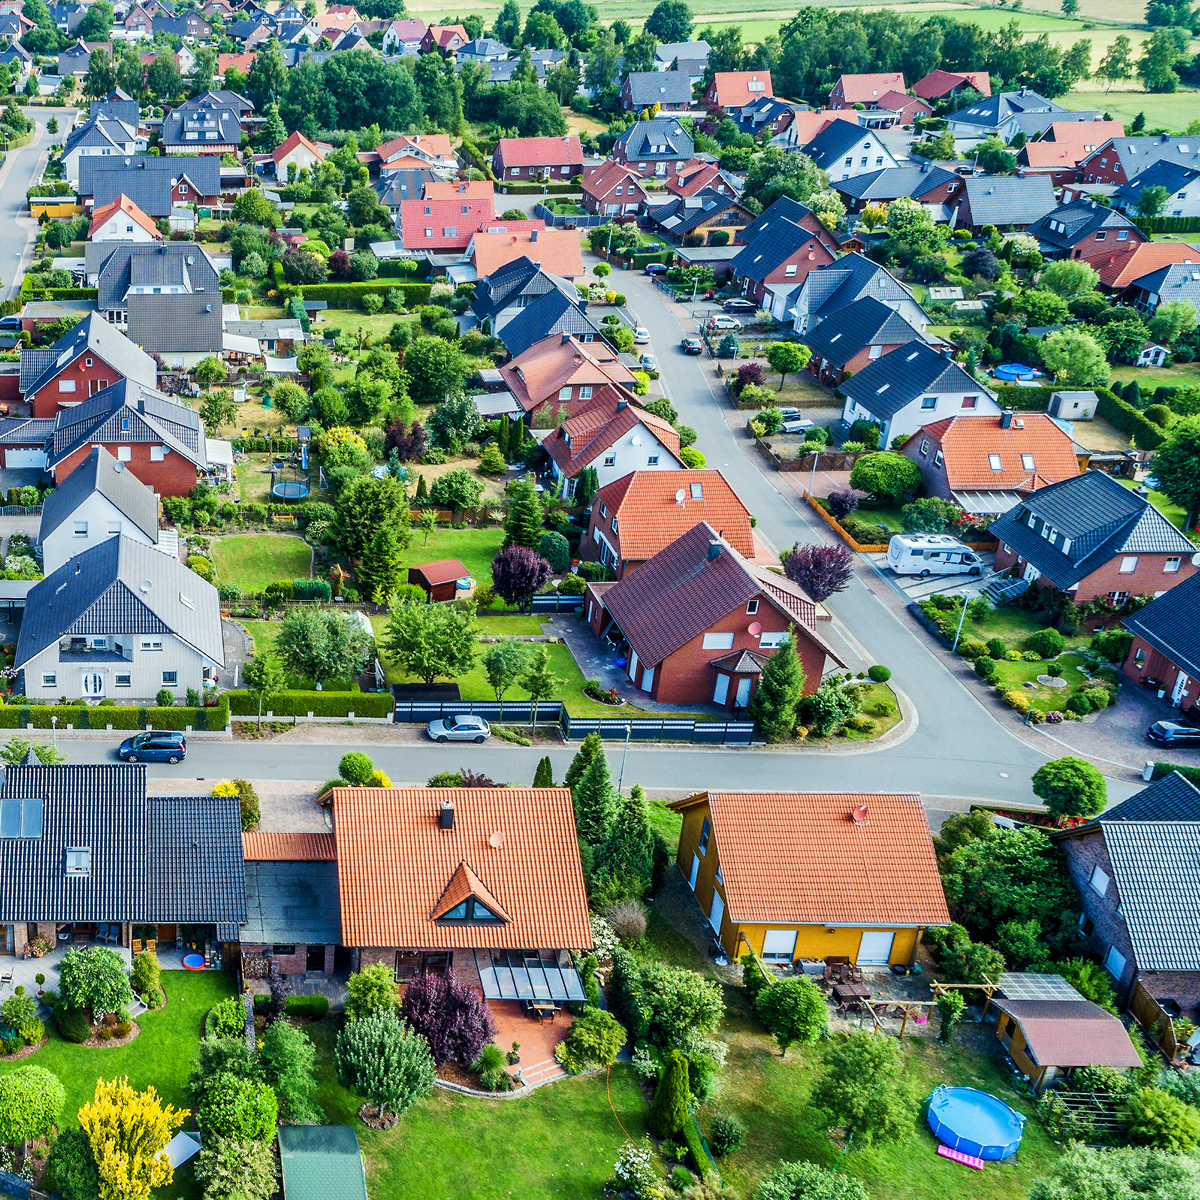 Aerial view of a suburb with detached houses